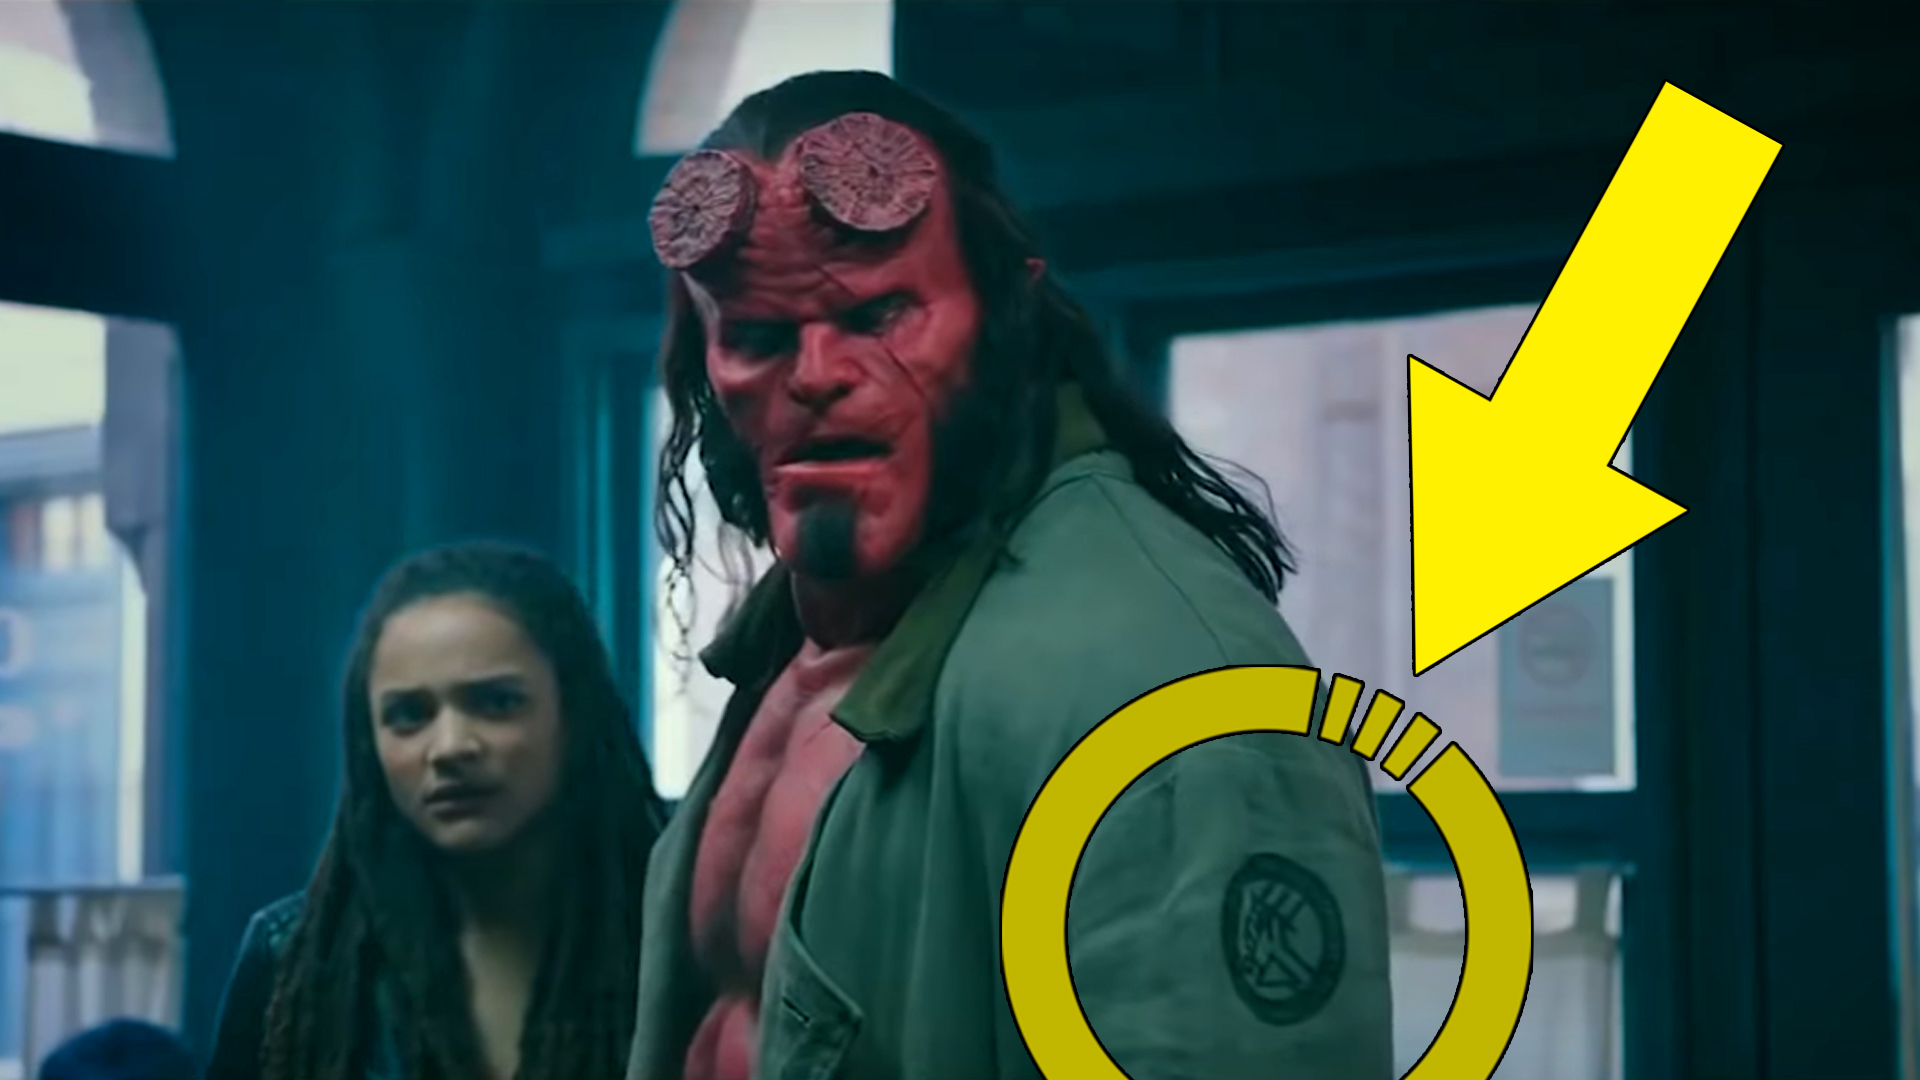 hellboy 2019 official trailer everything you missed breakdown easter egg explained spoiler talk review on the new david harbour lionsgate film